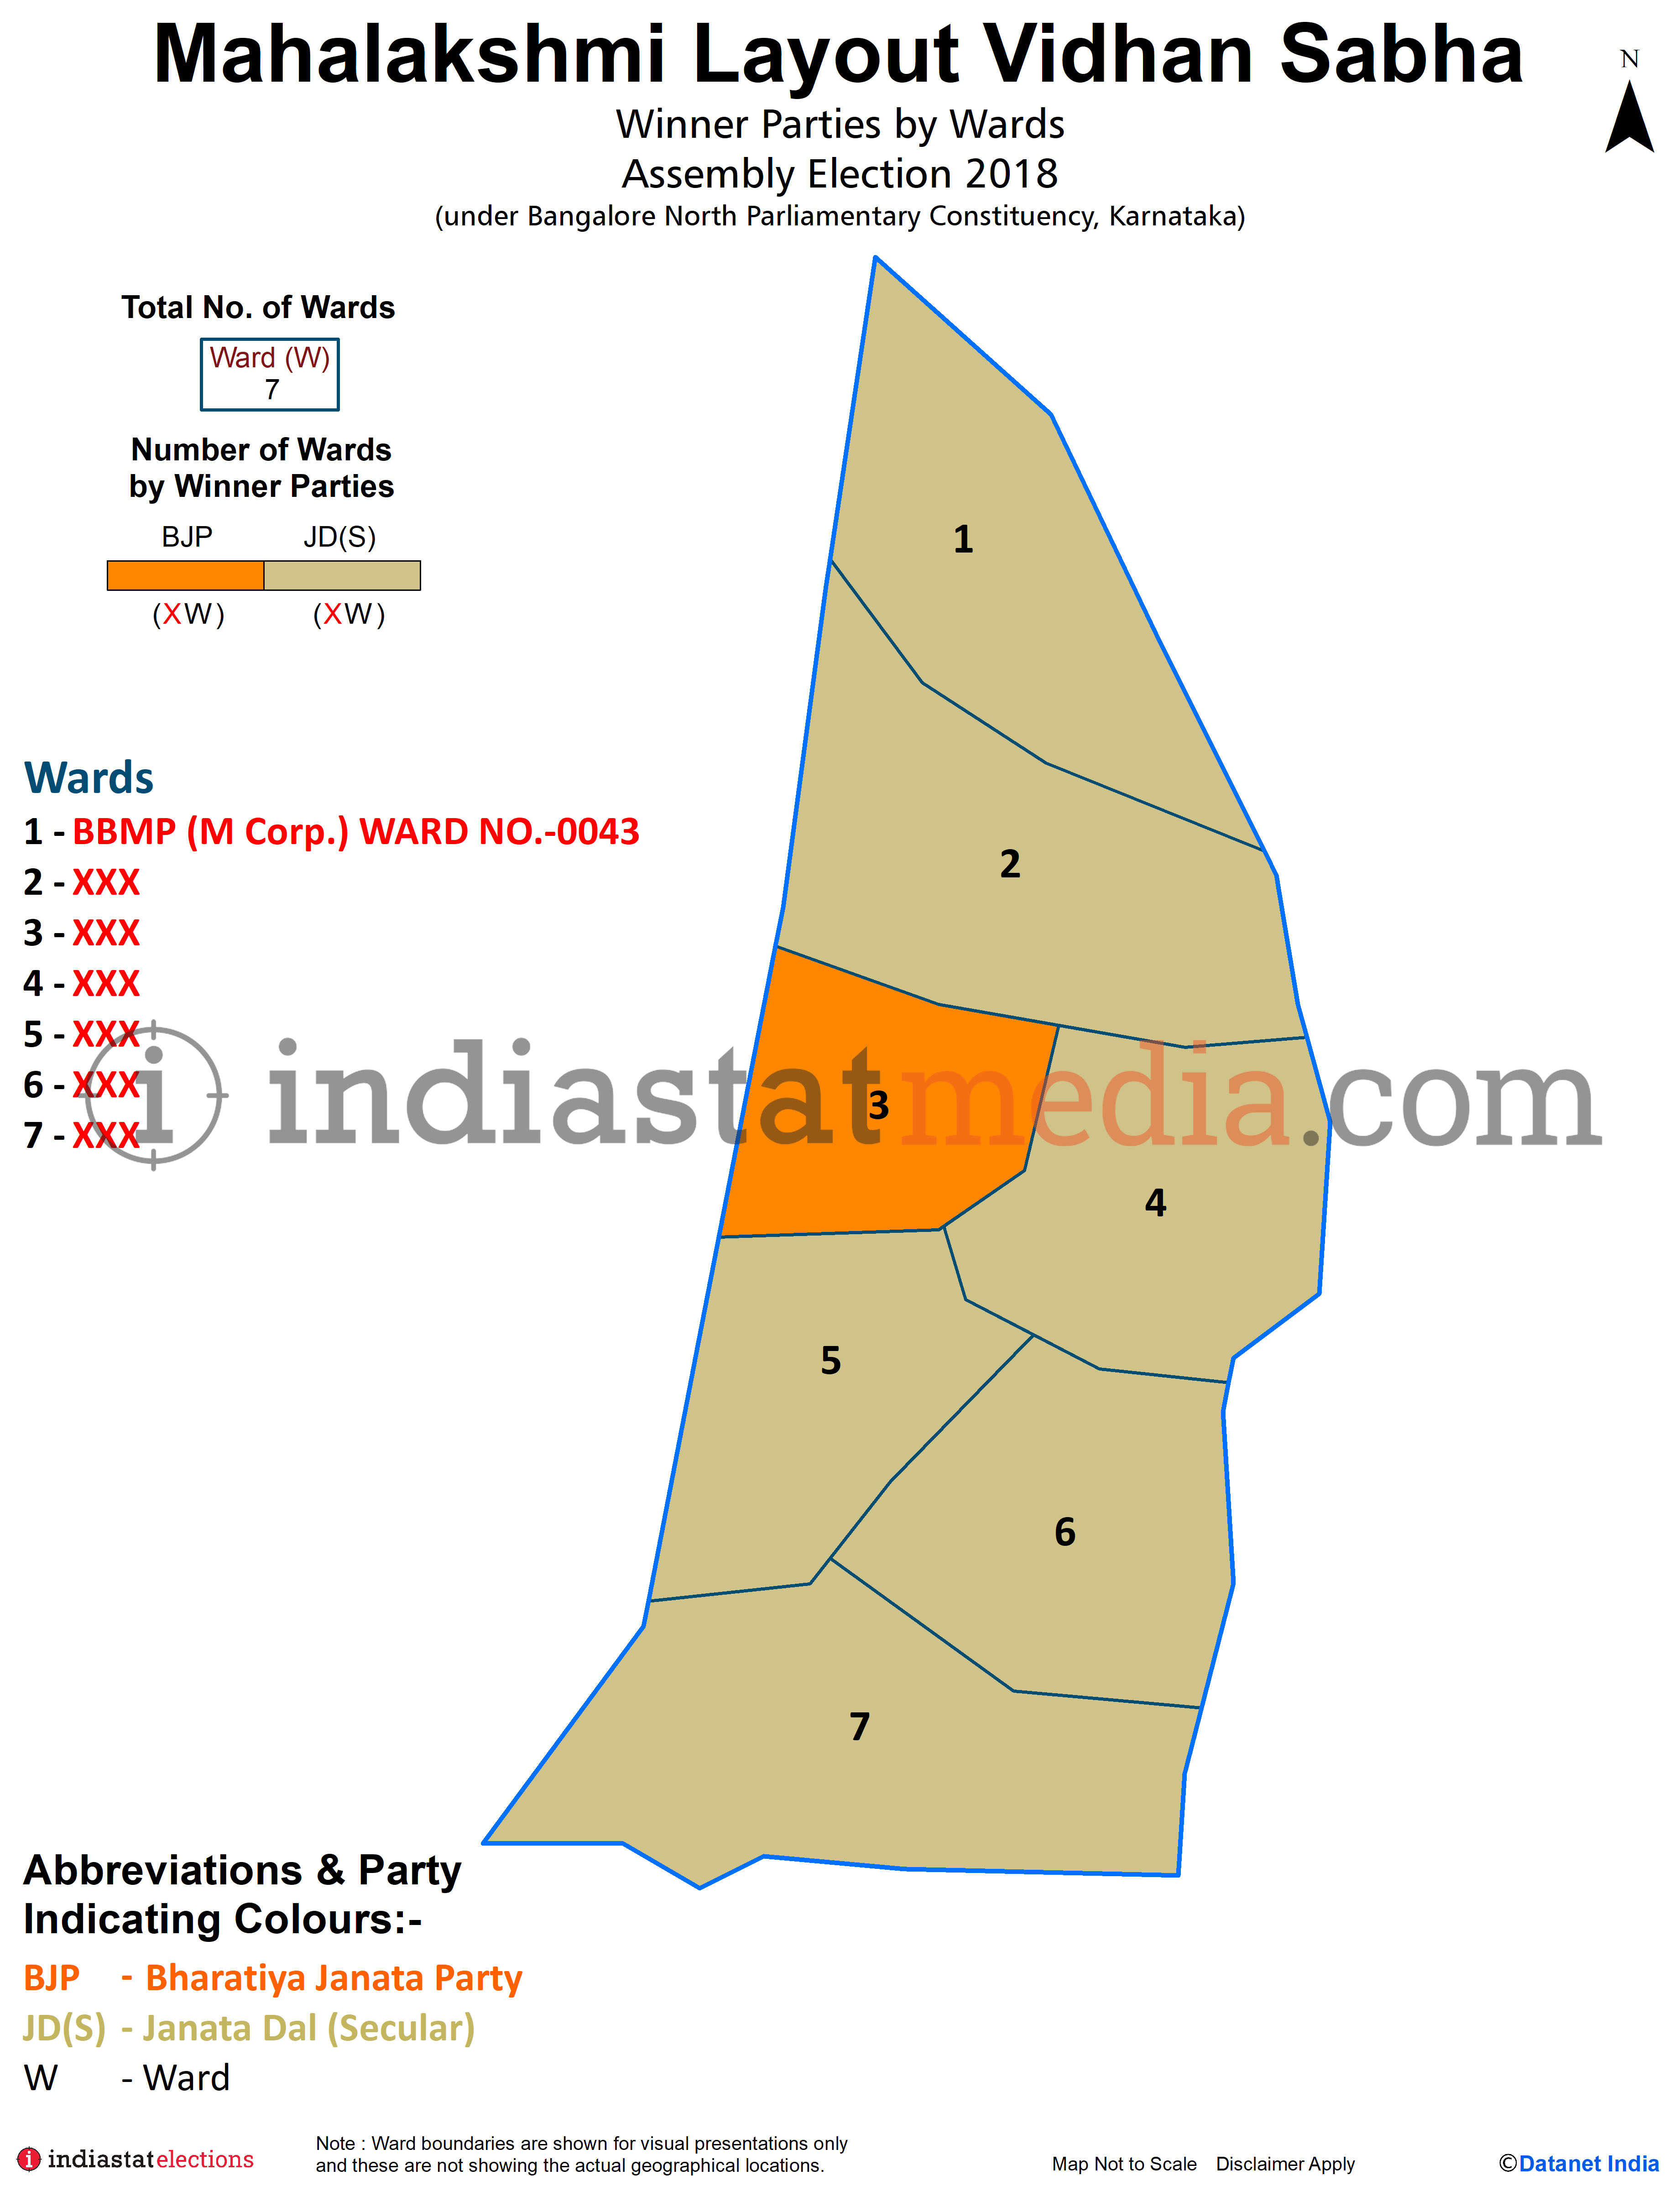 Winner Parties by Wards in Mahalakshmi Layout Assembly Constituency under Bangalore North Parliamentary Constituency in Karnataka (Assembly Election - 2018)